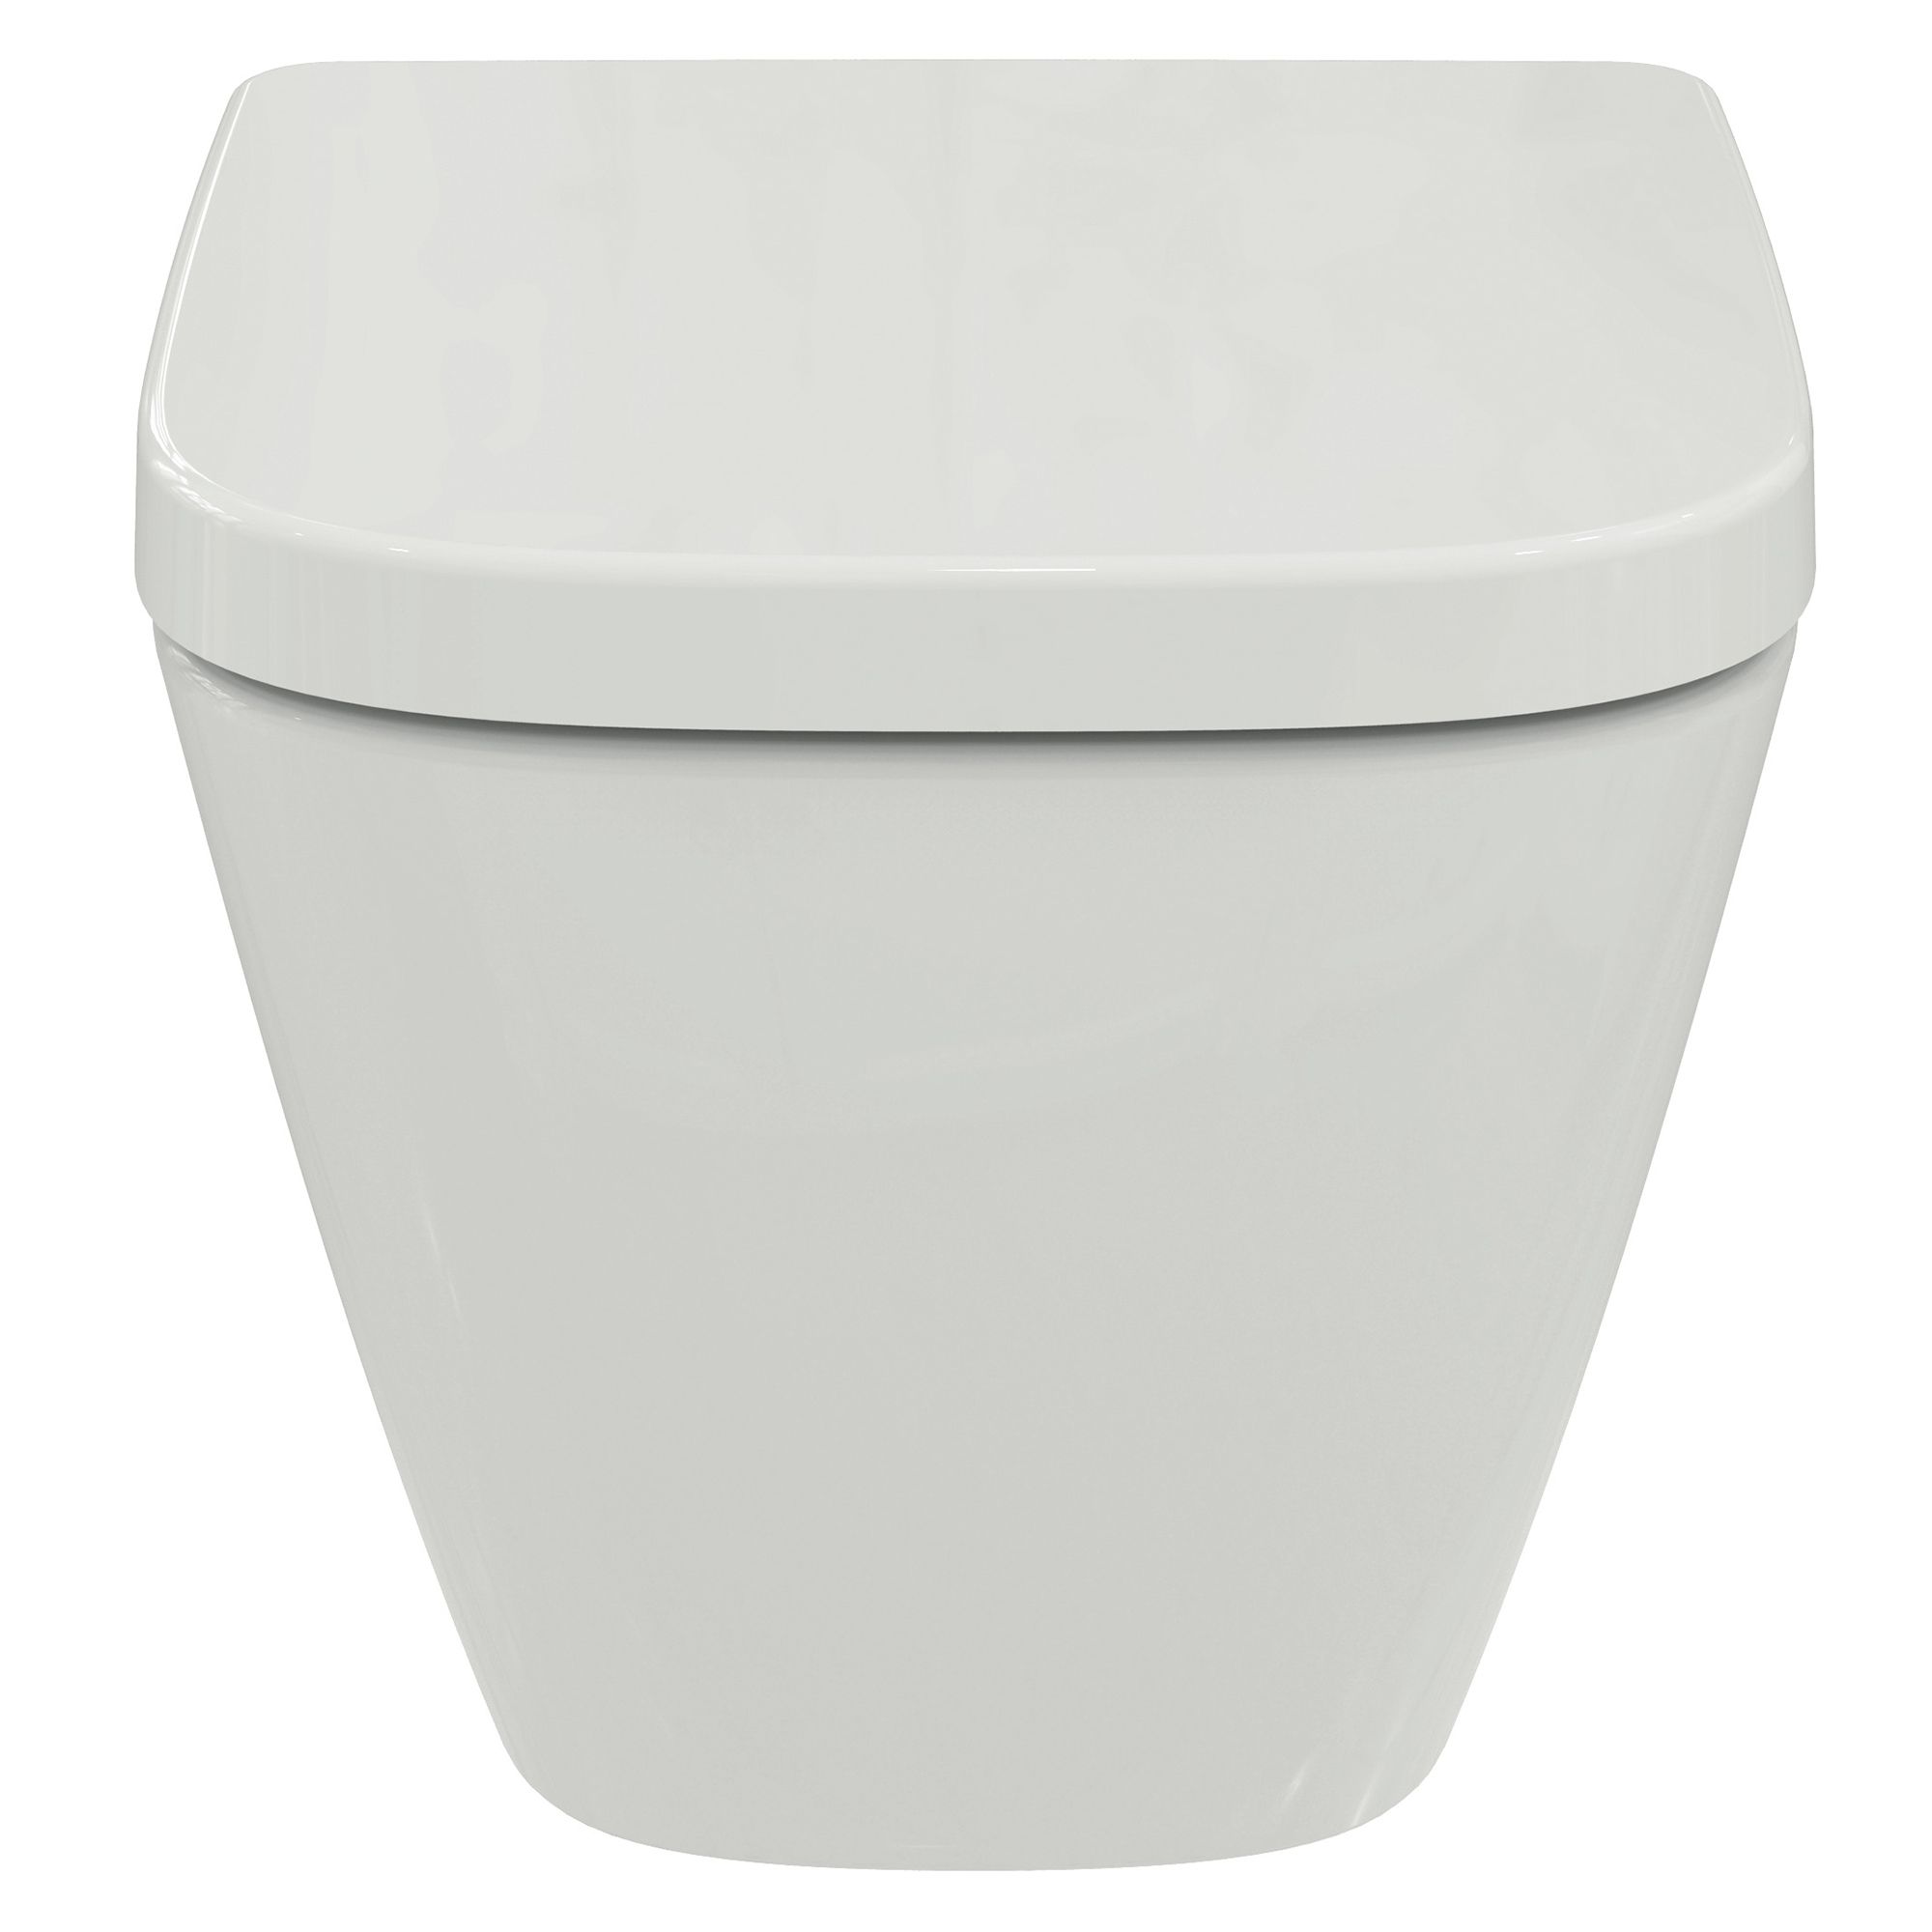 Ideal Standard i.life S White Standard Wall hung Square Toilet set with Soft close seat